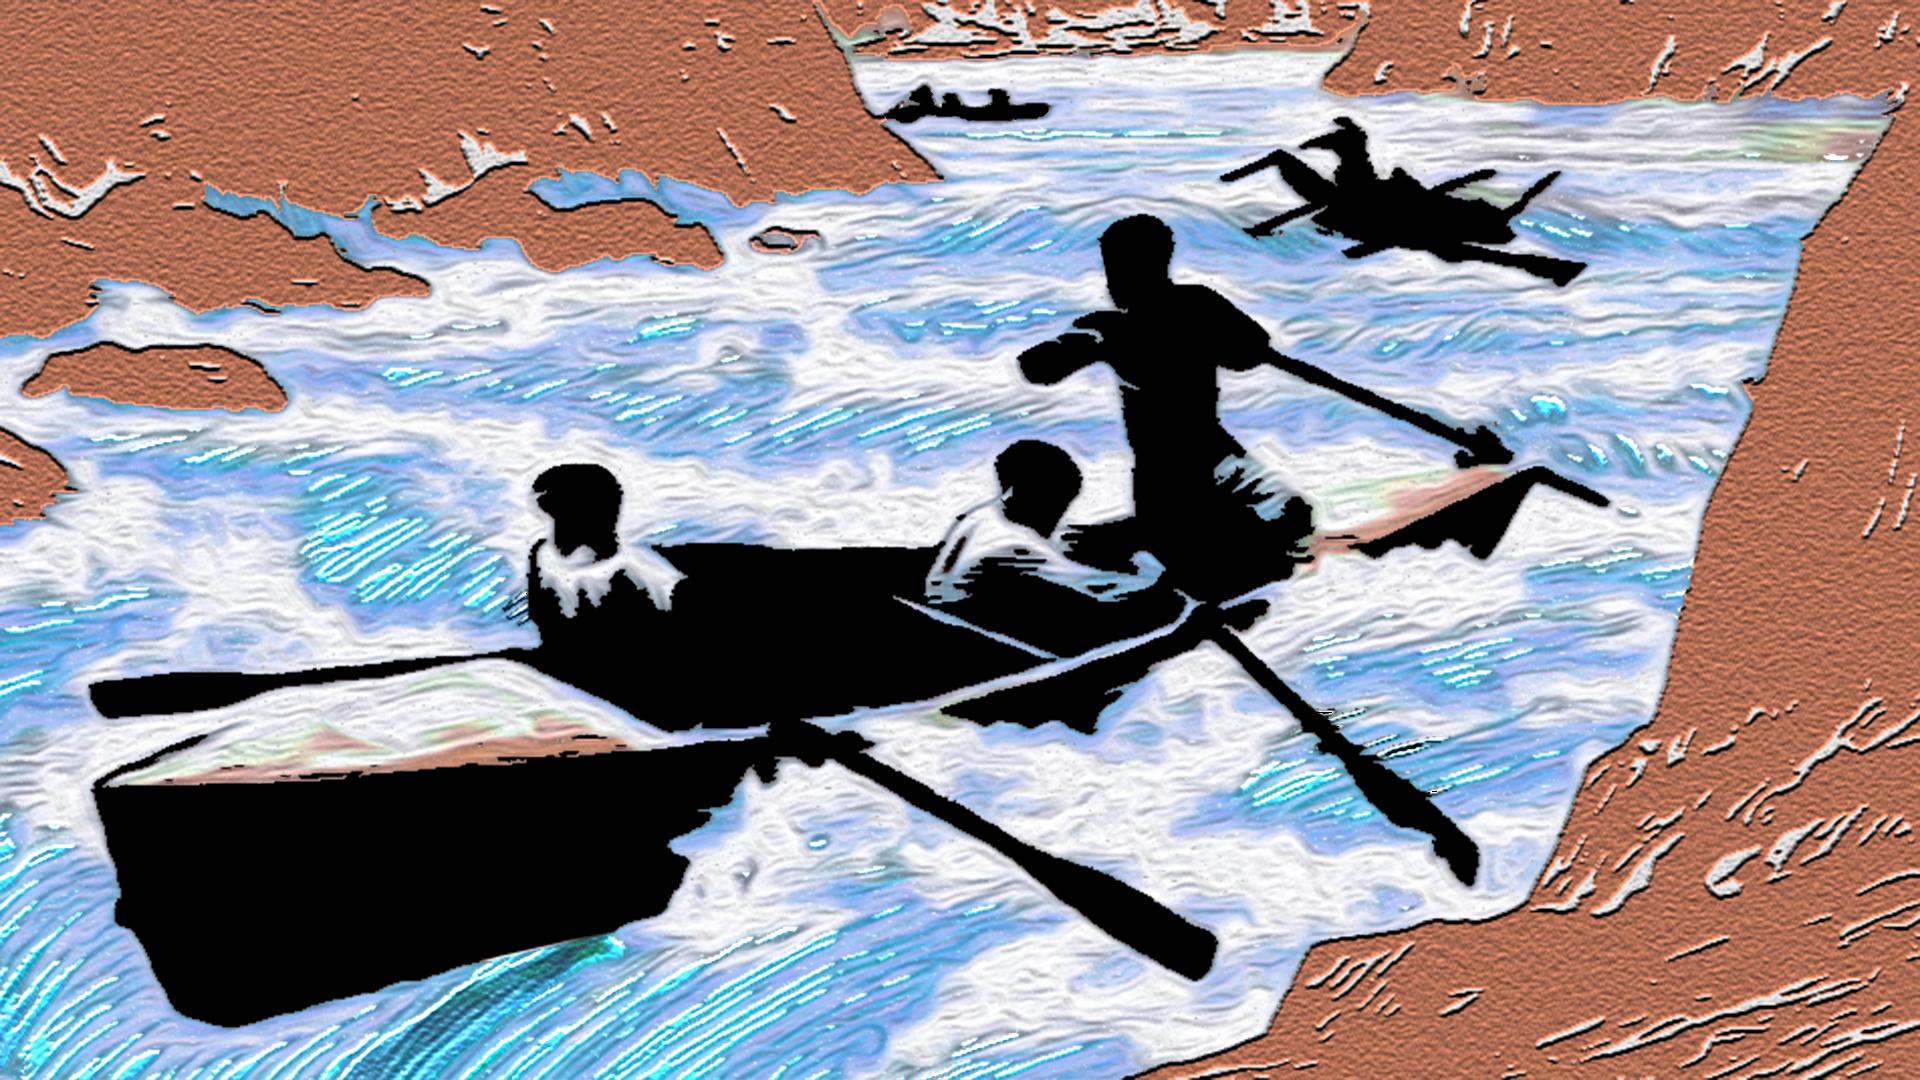 Colored illustration showing 3 canoes rowed by men in white water conditions through a winding canyon